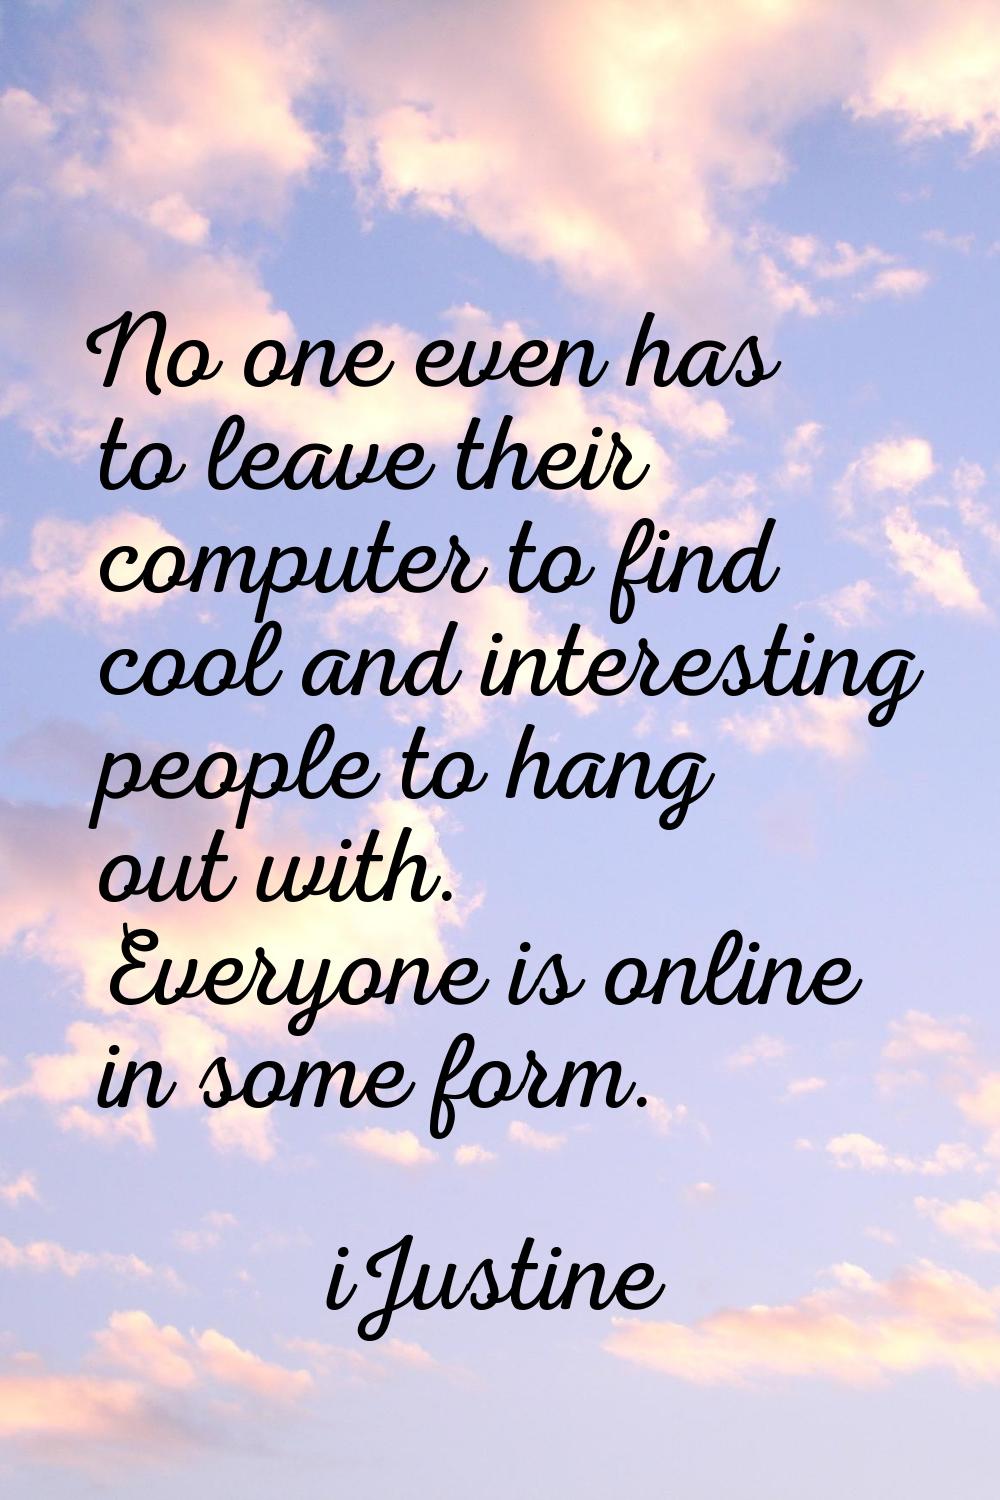 No one even has to leave their computer to find cool and interesting people to hang out with. Every